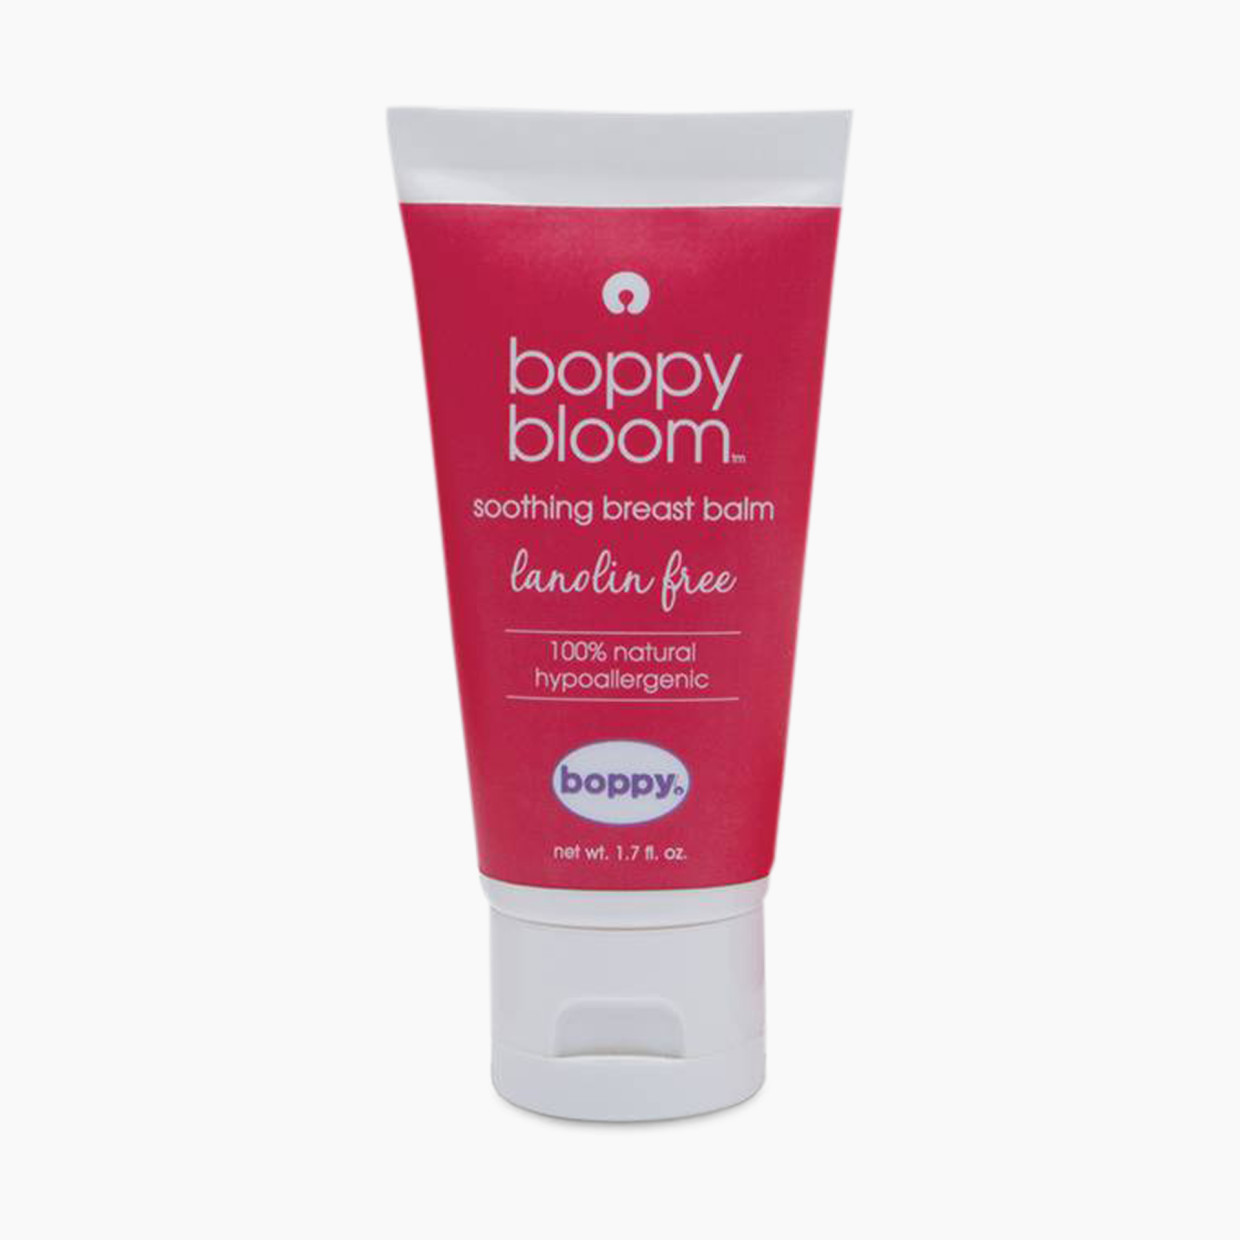 Boppy Soothing Breast Balm.